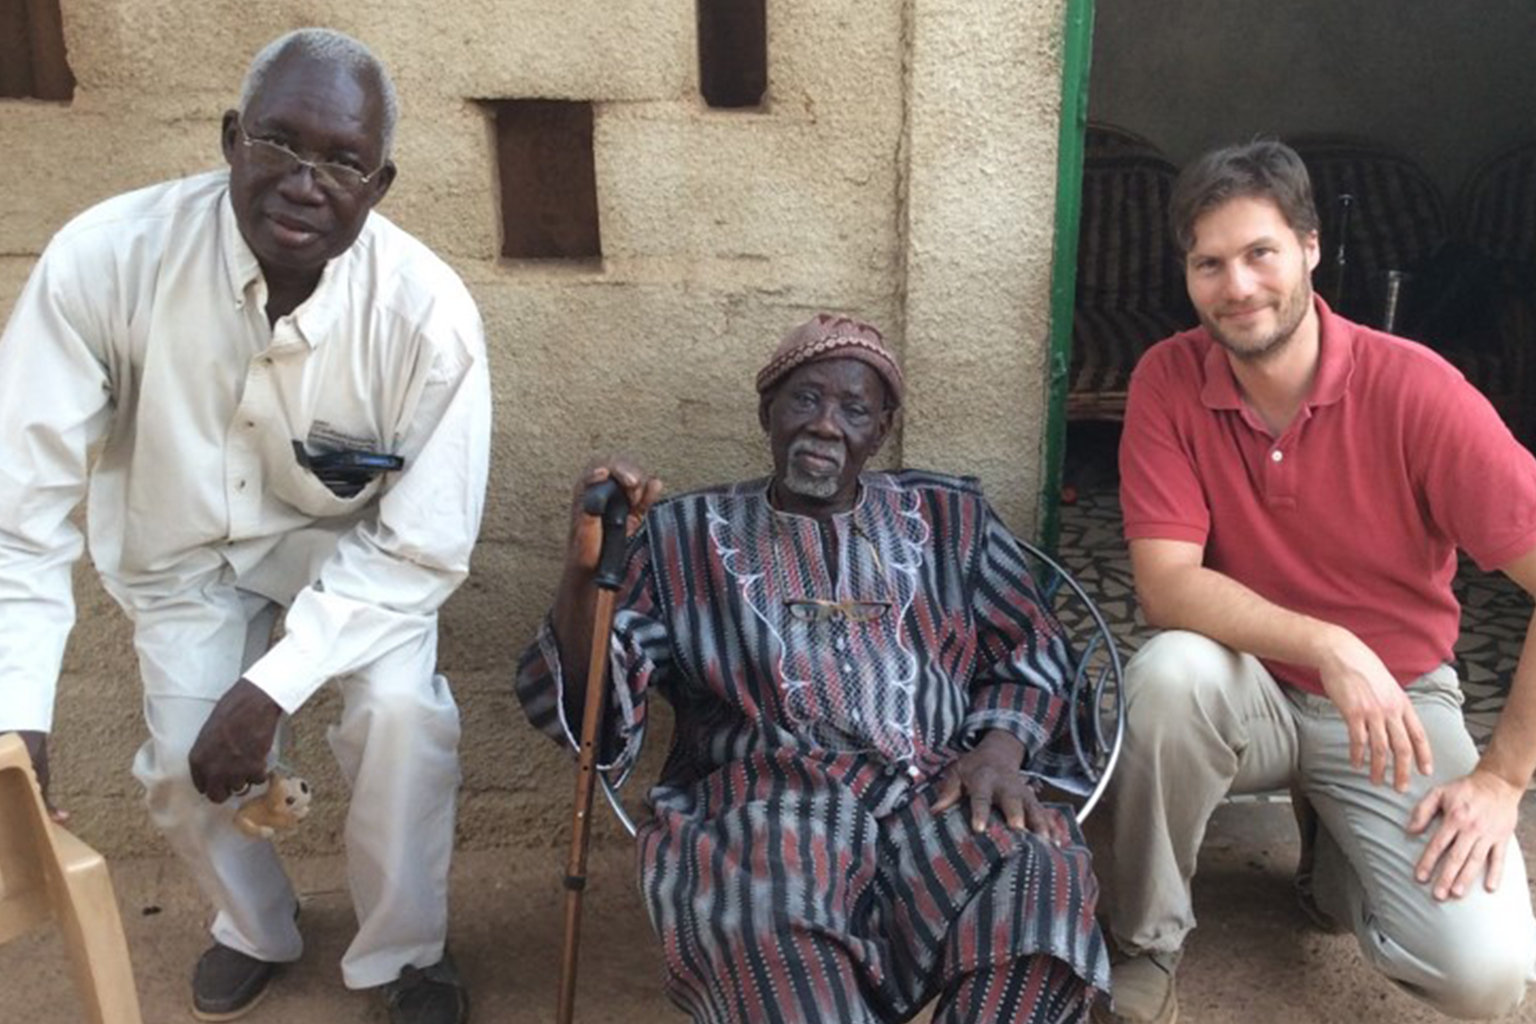 three men in Africa sitting next to cement wall